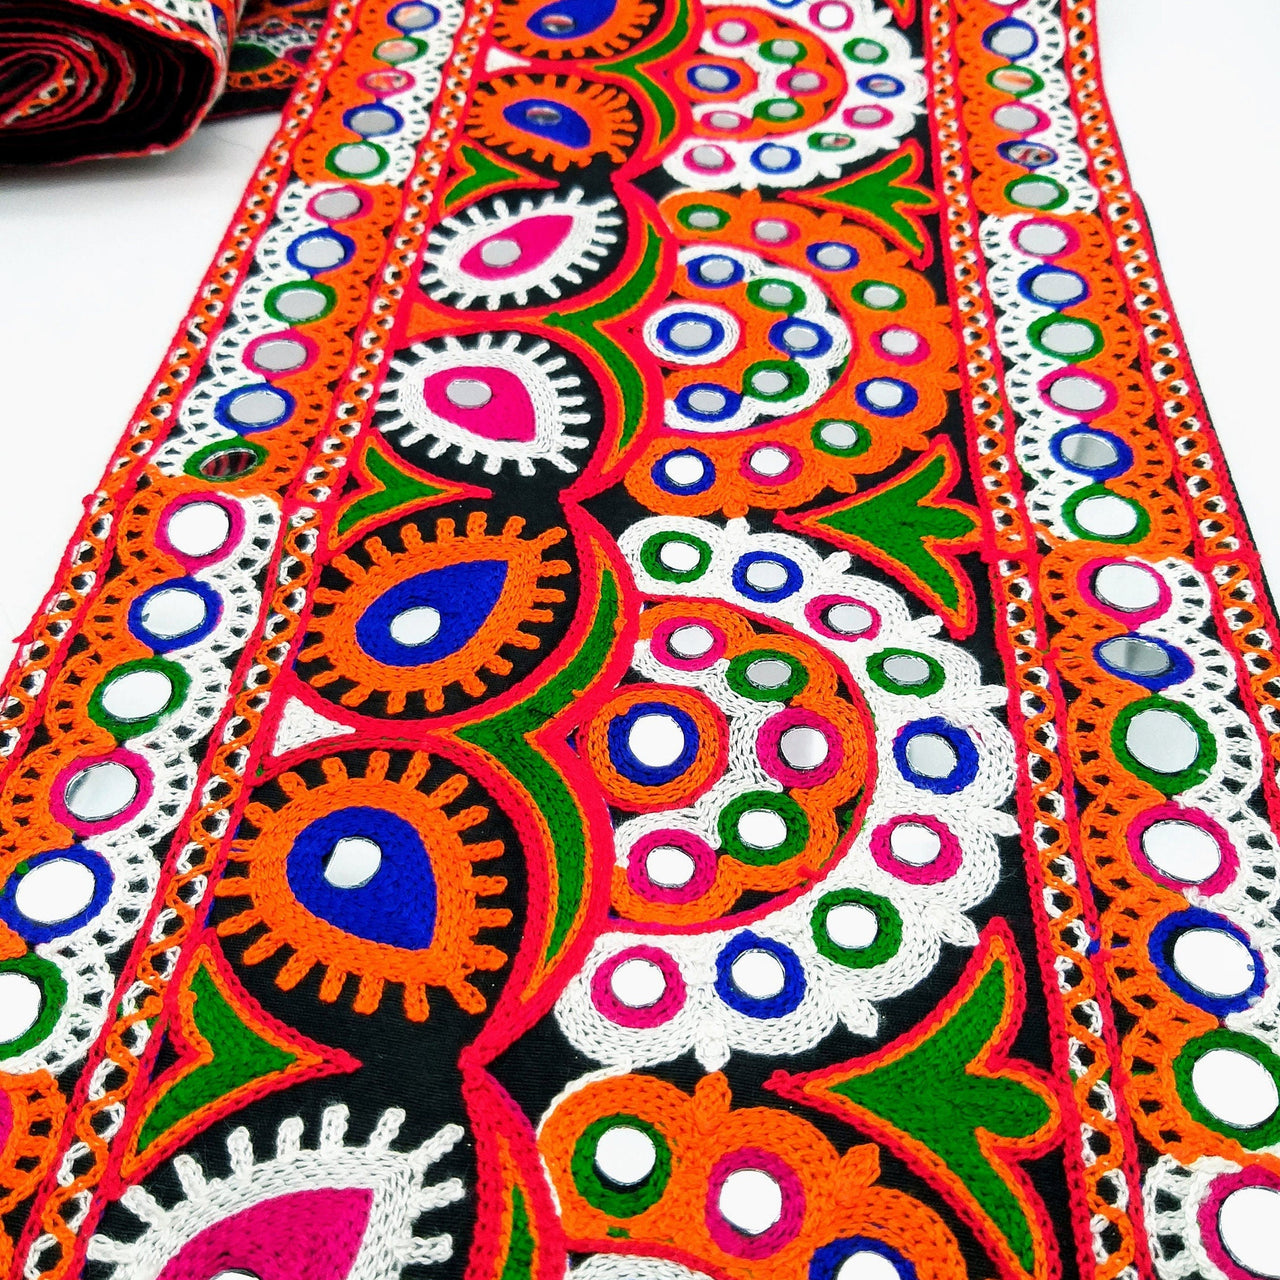 Black Cotton Fabric Trim with Multicolor Embroidery and Real Mirror, Kutch Embroidery Trim, Paisley Decorative Border